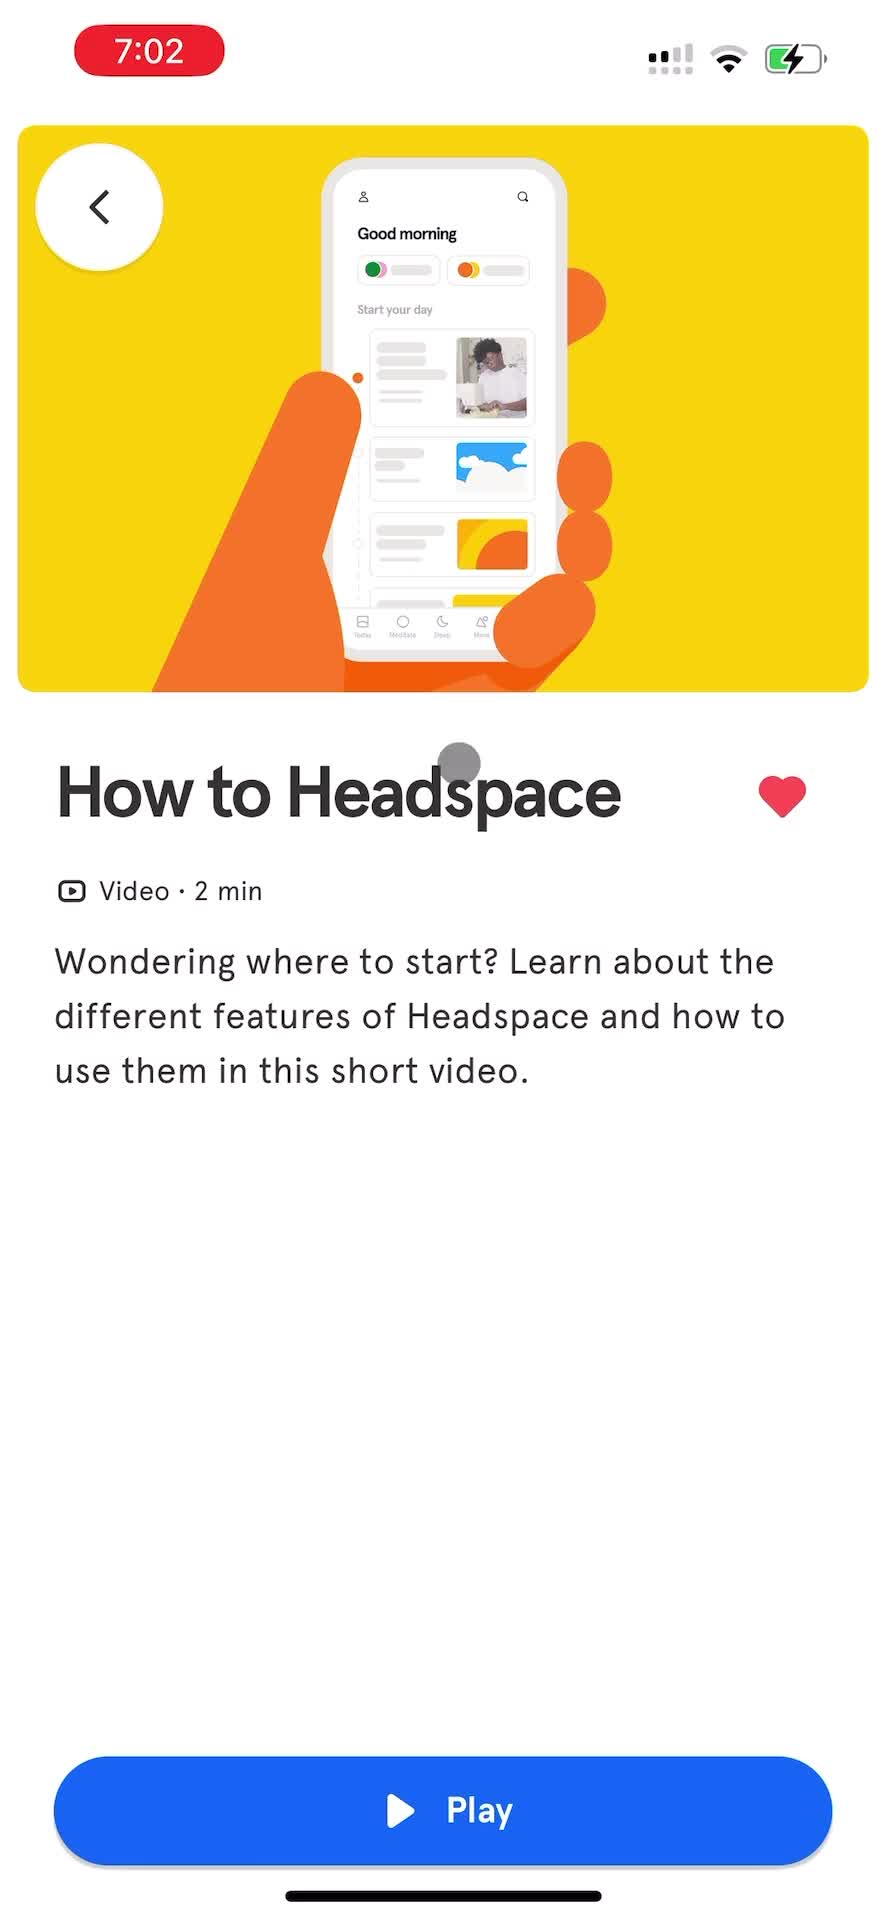 Screenshot of Guide on General browsing on Headspace user flow